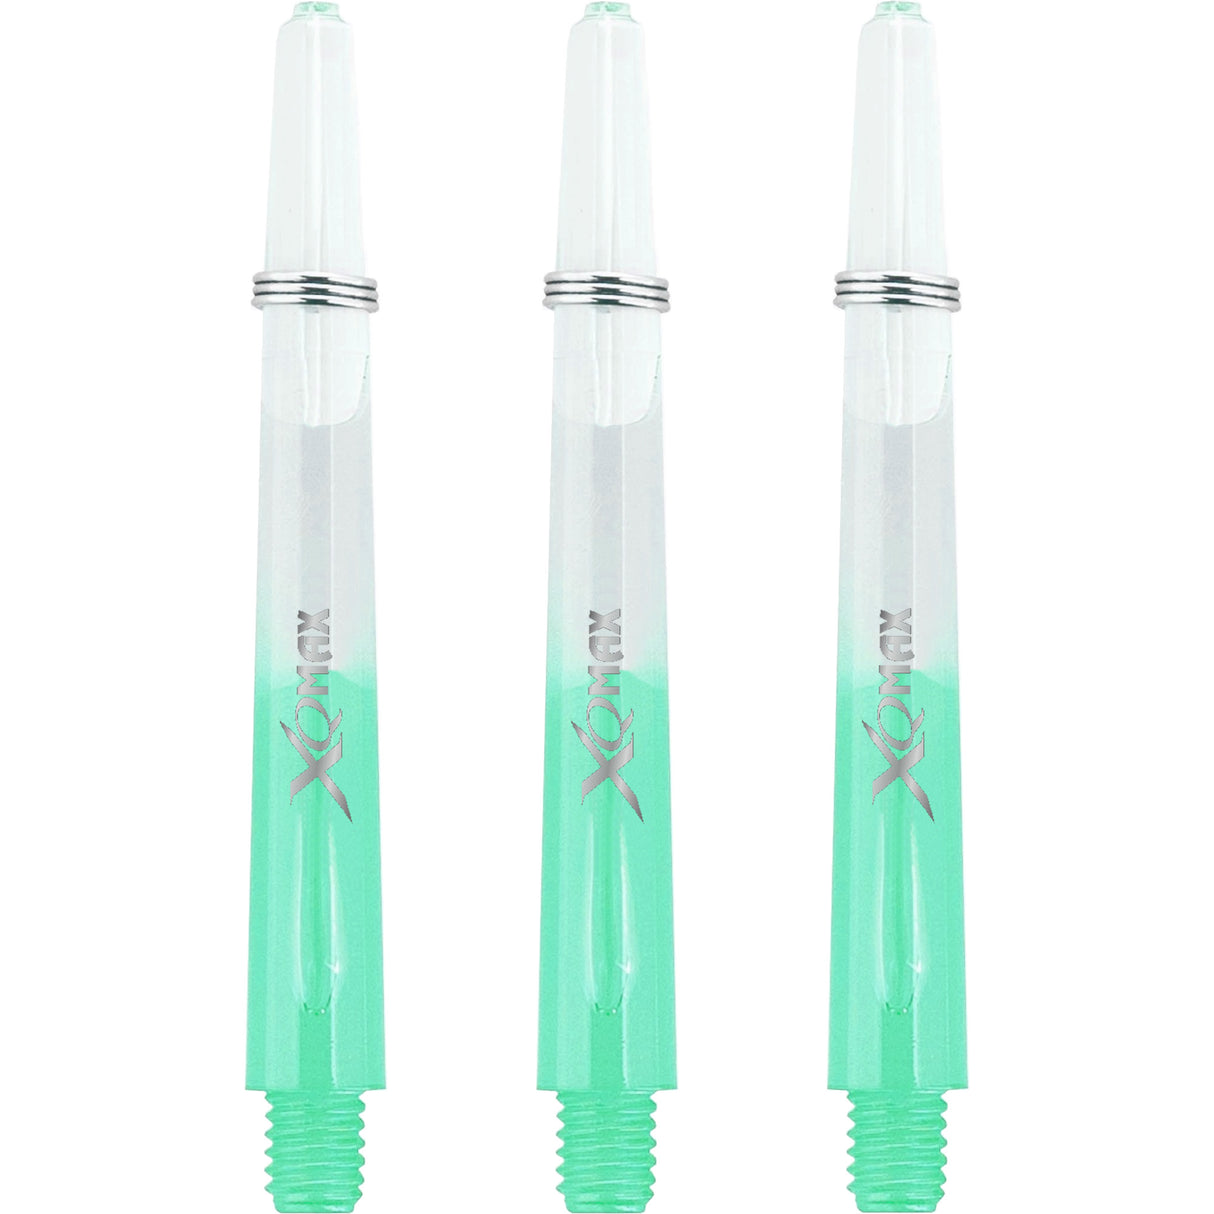 XQMax Gradient Polycarbonate Dart Shafts - with Logo - includes Springs - Transparent & Green